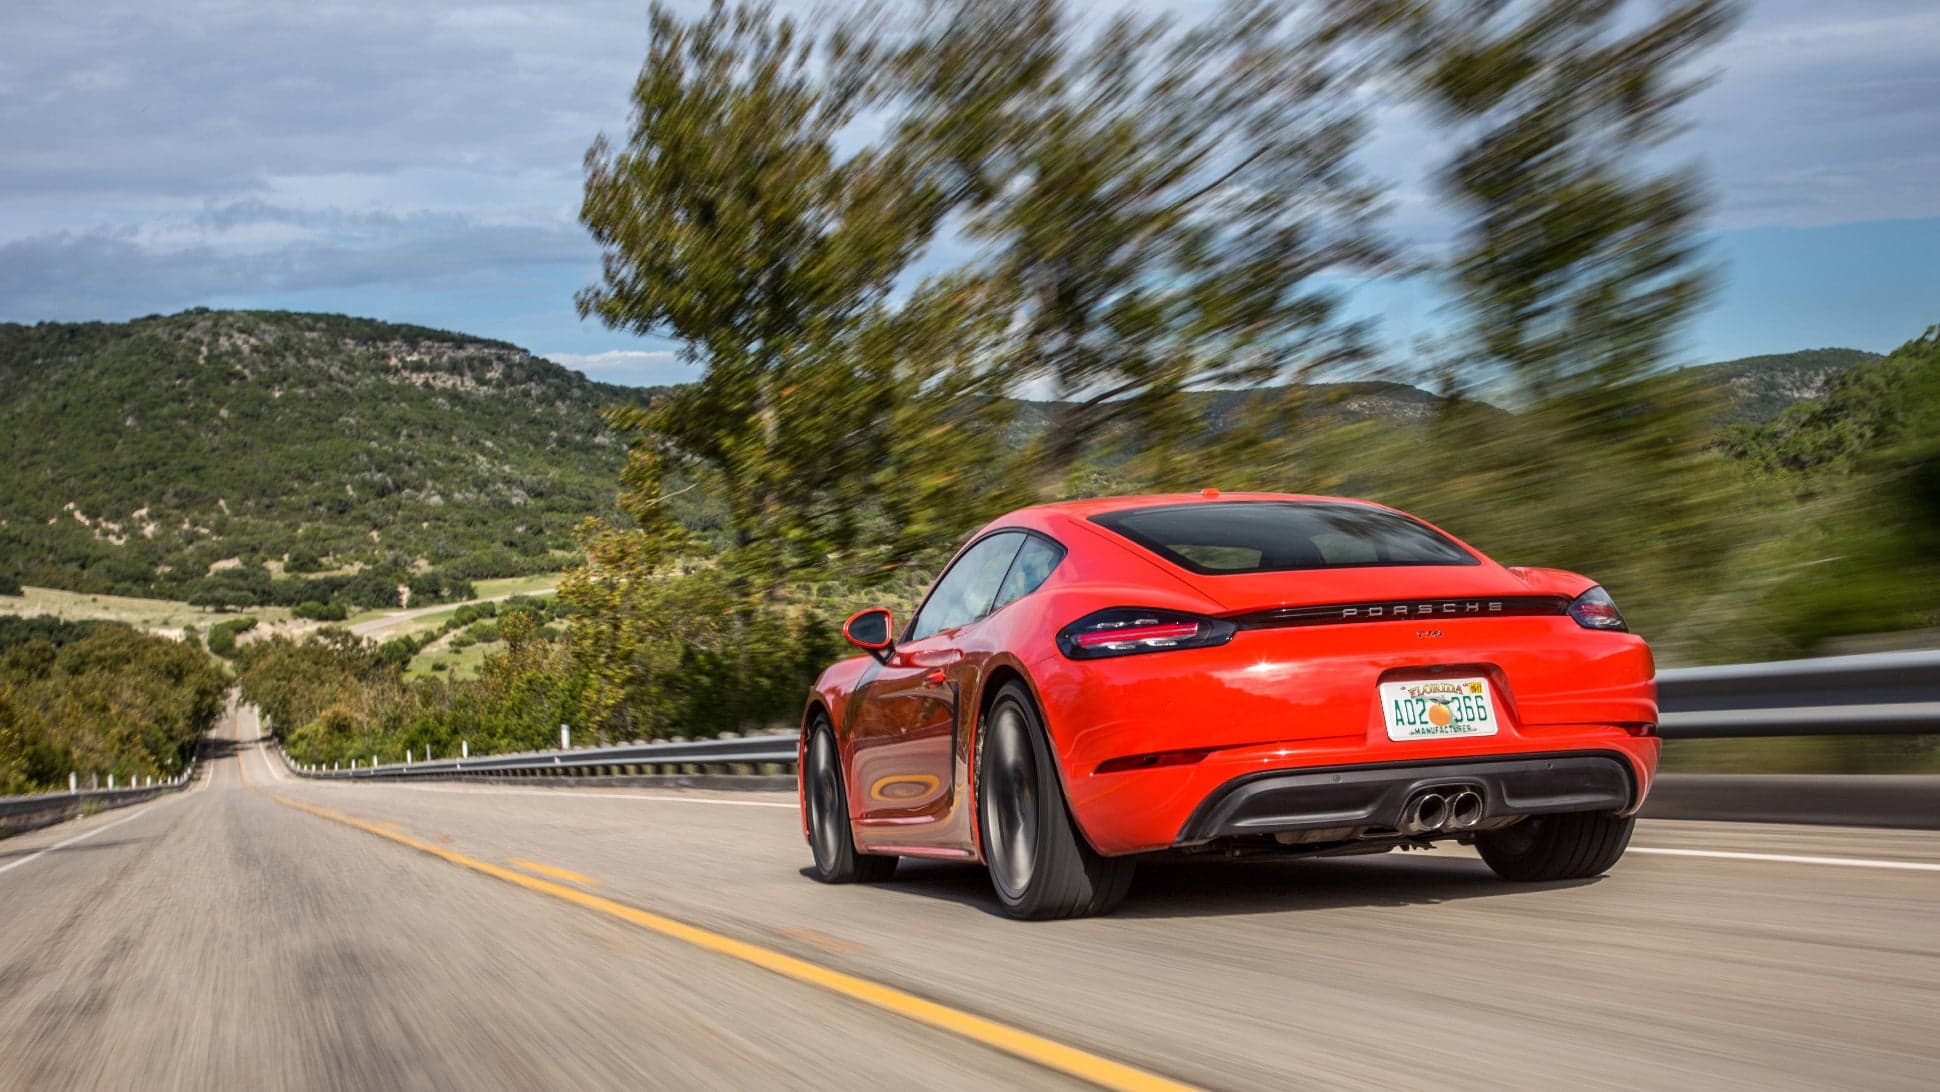 718 Porsche Boxster, Cayman Will Go Electric in Early 2020s, Hybrids Possible: Report